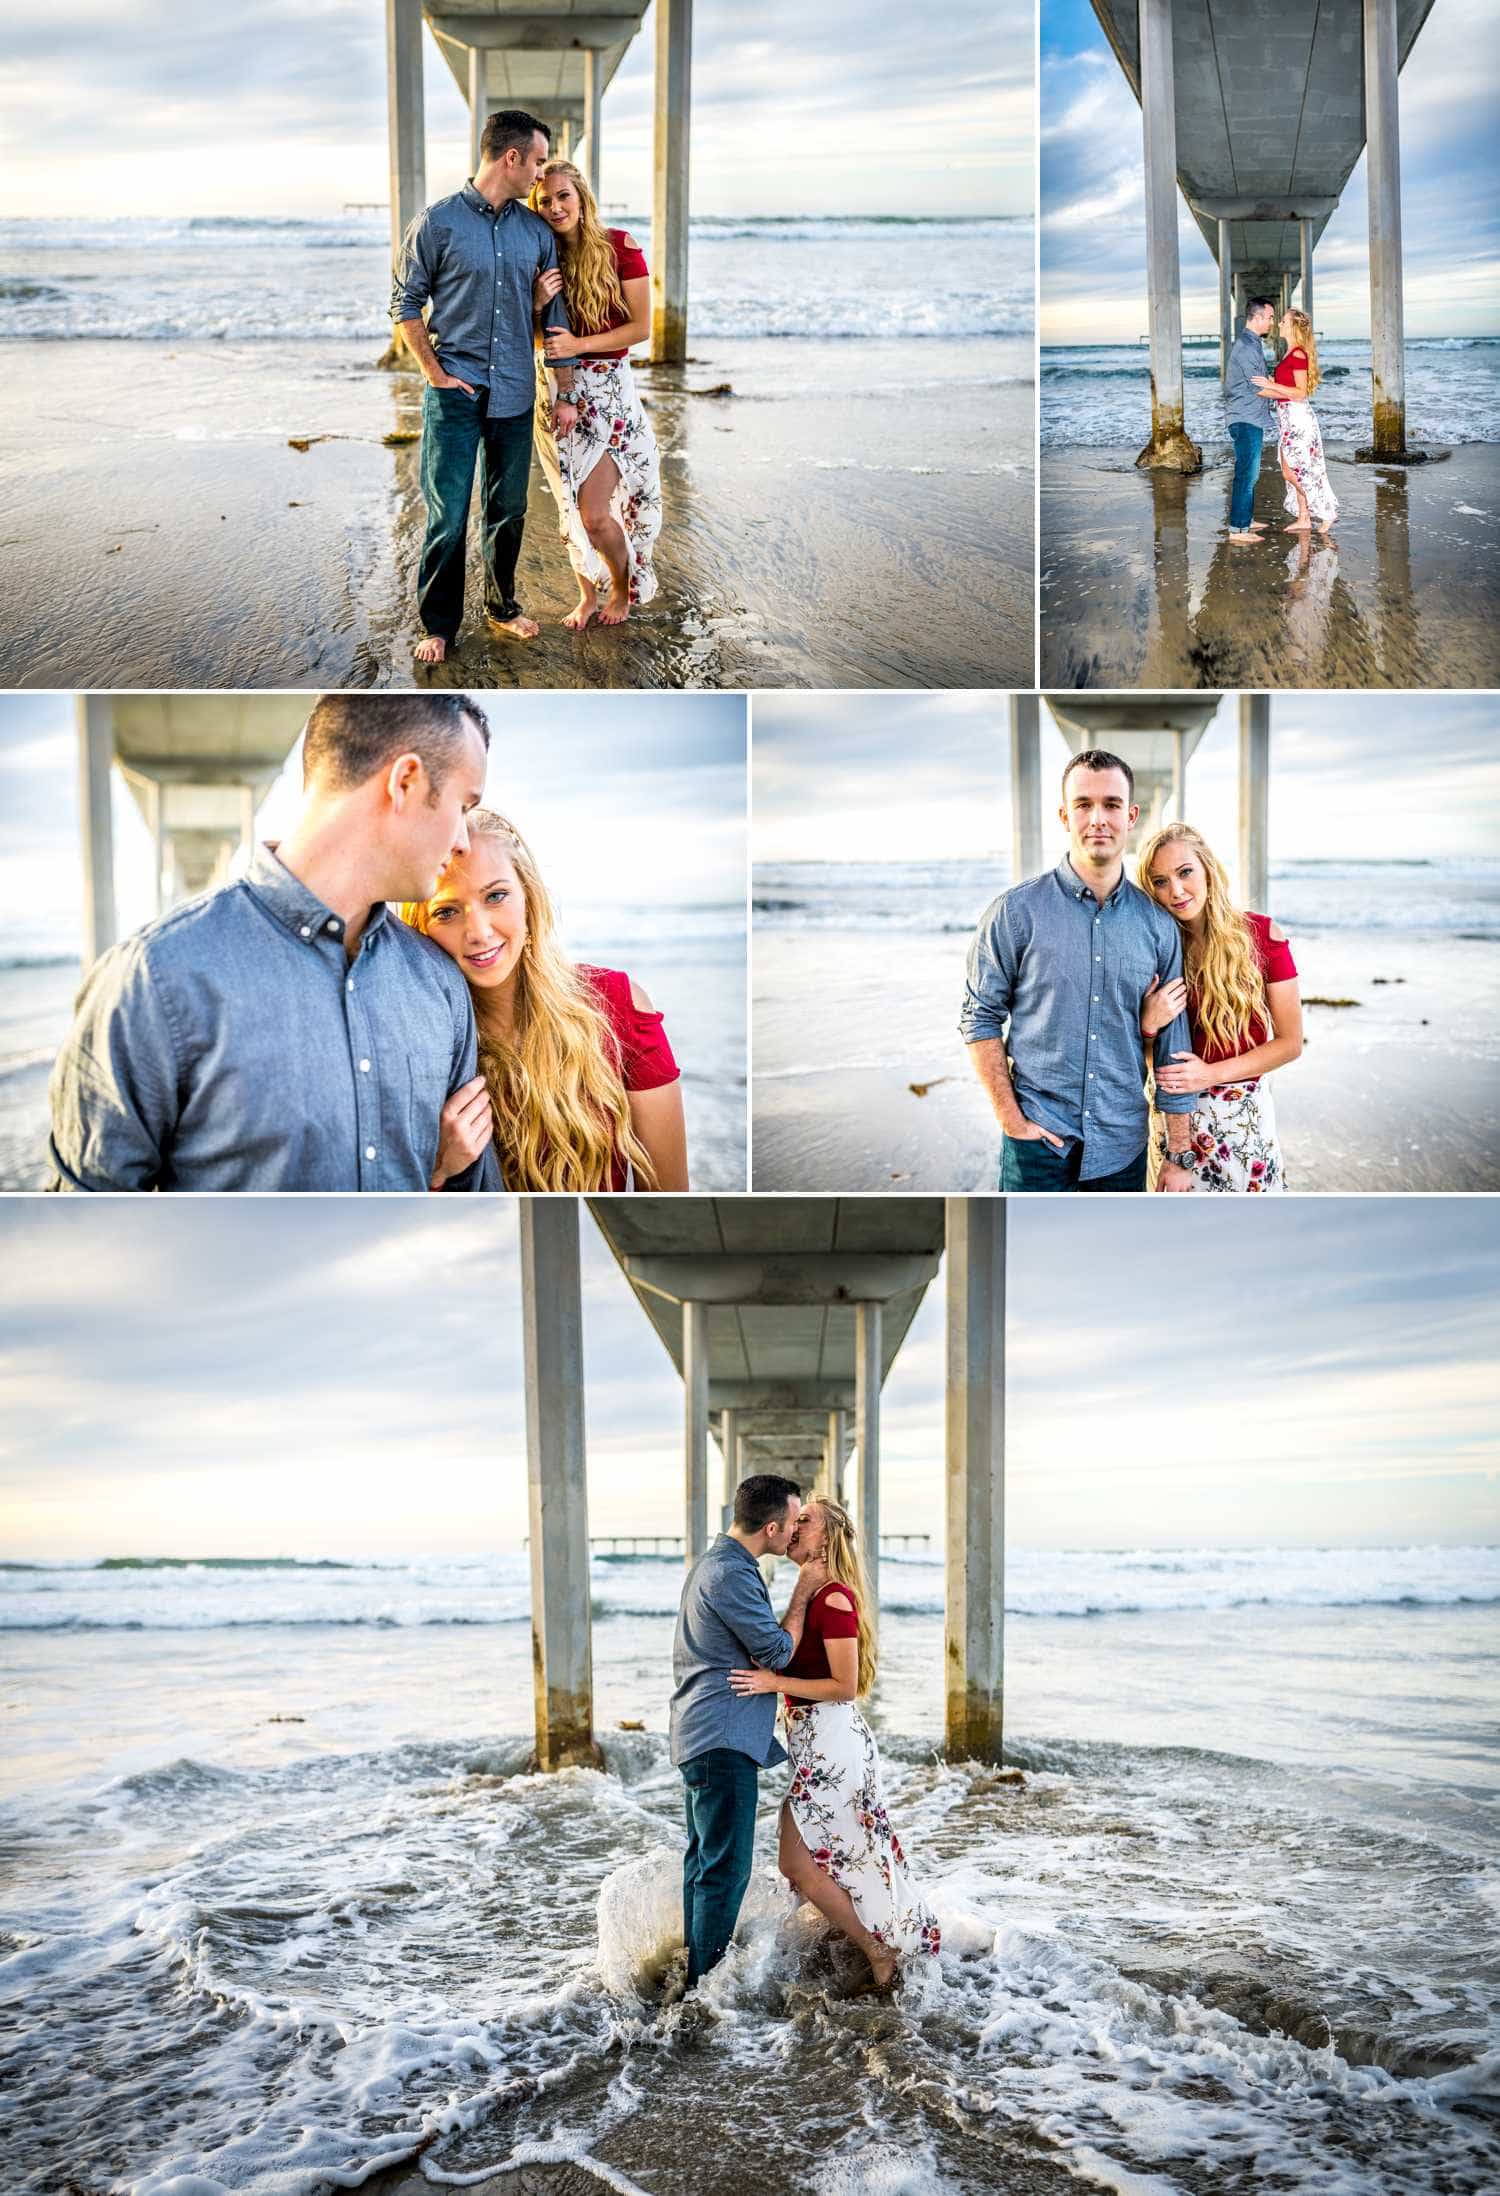 Engagement session under a pier at the beach.